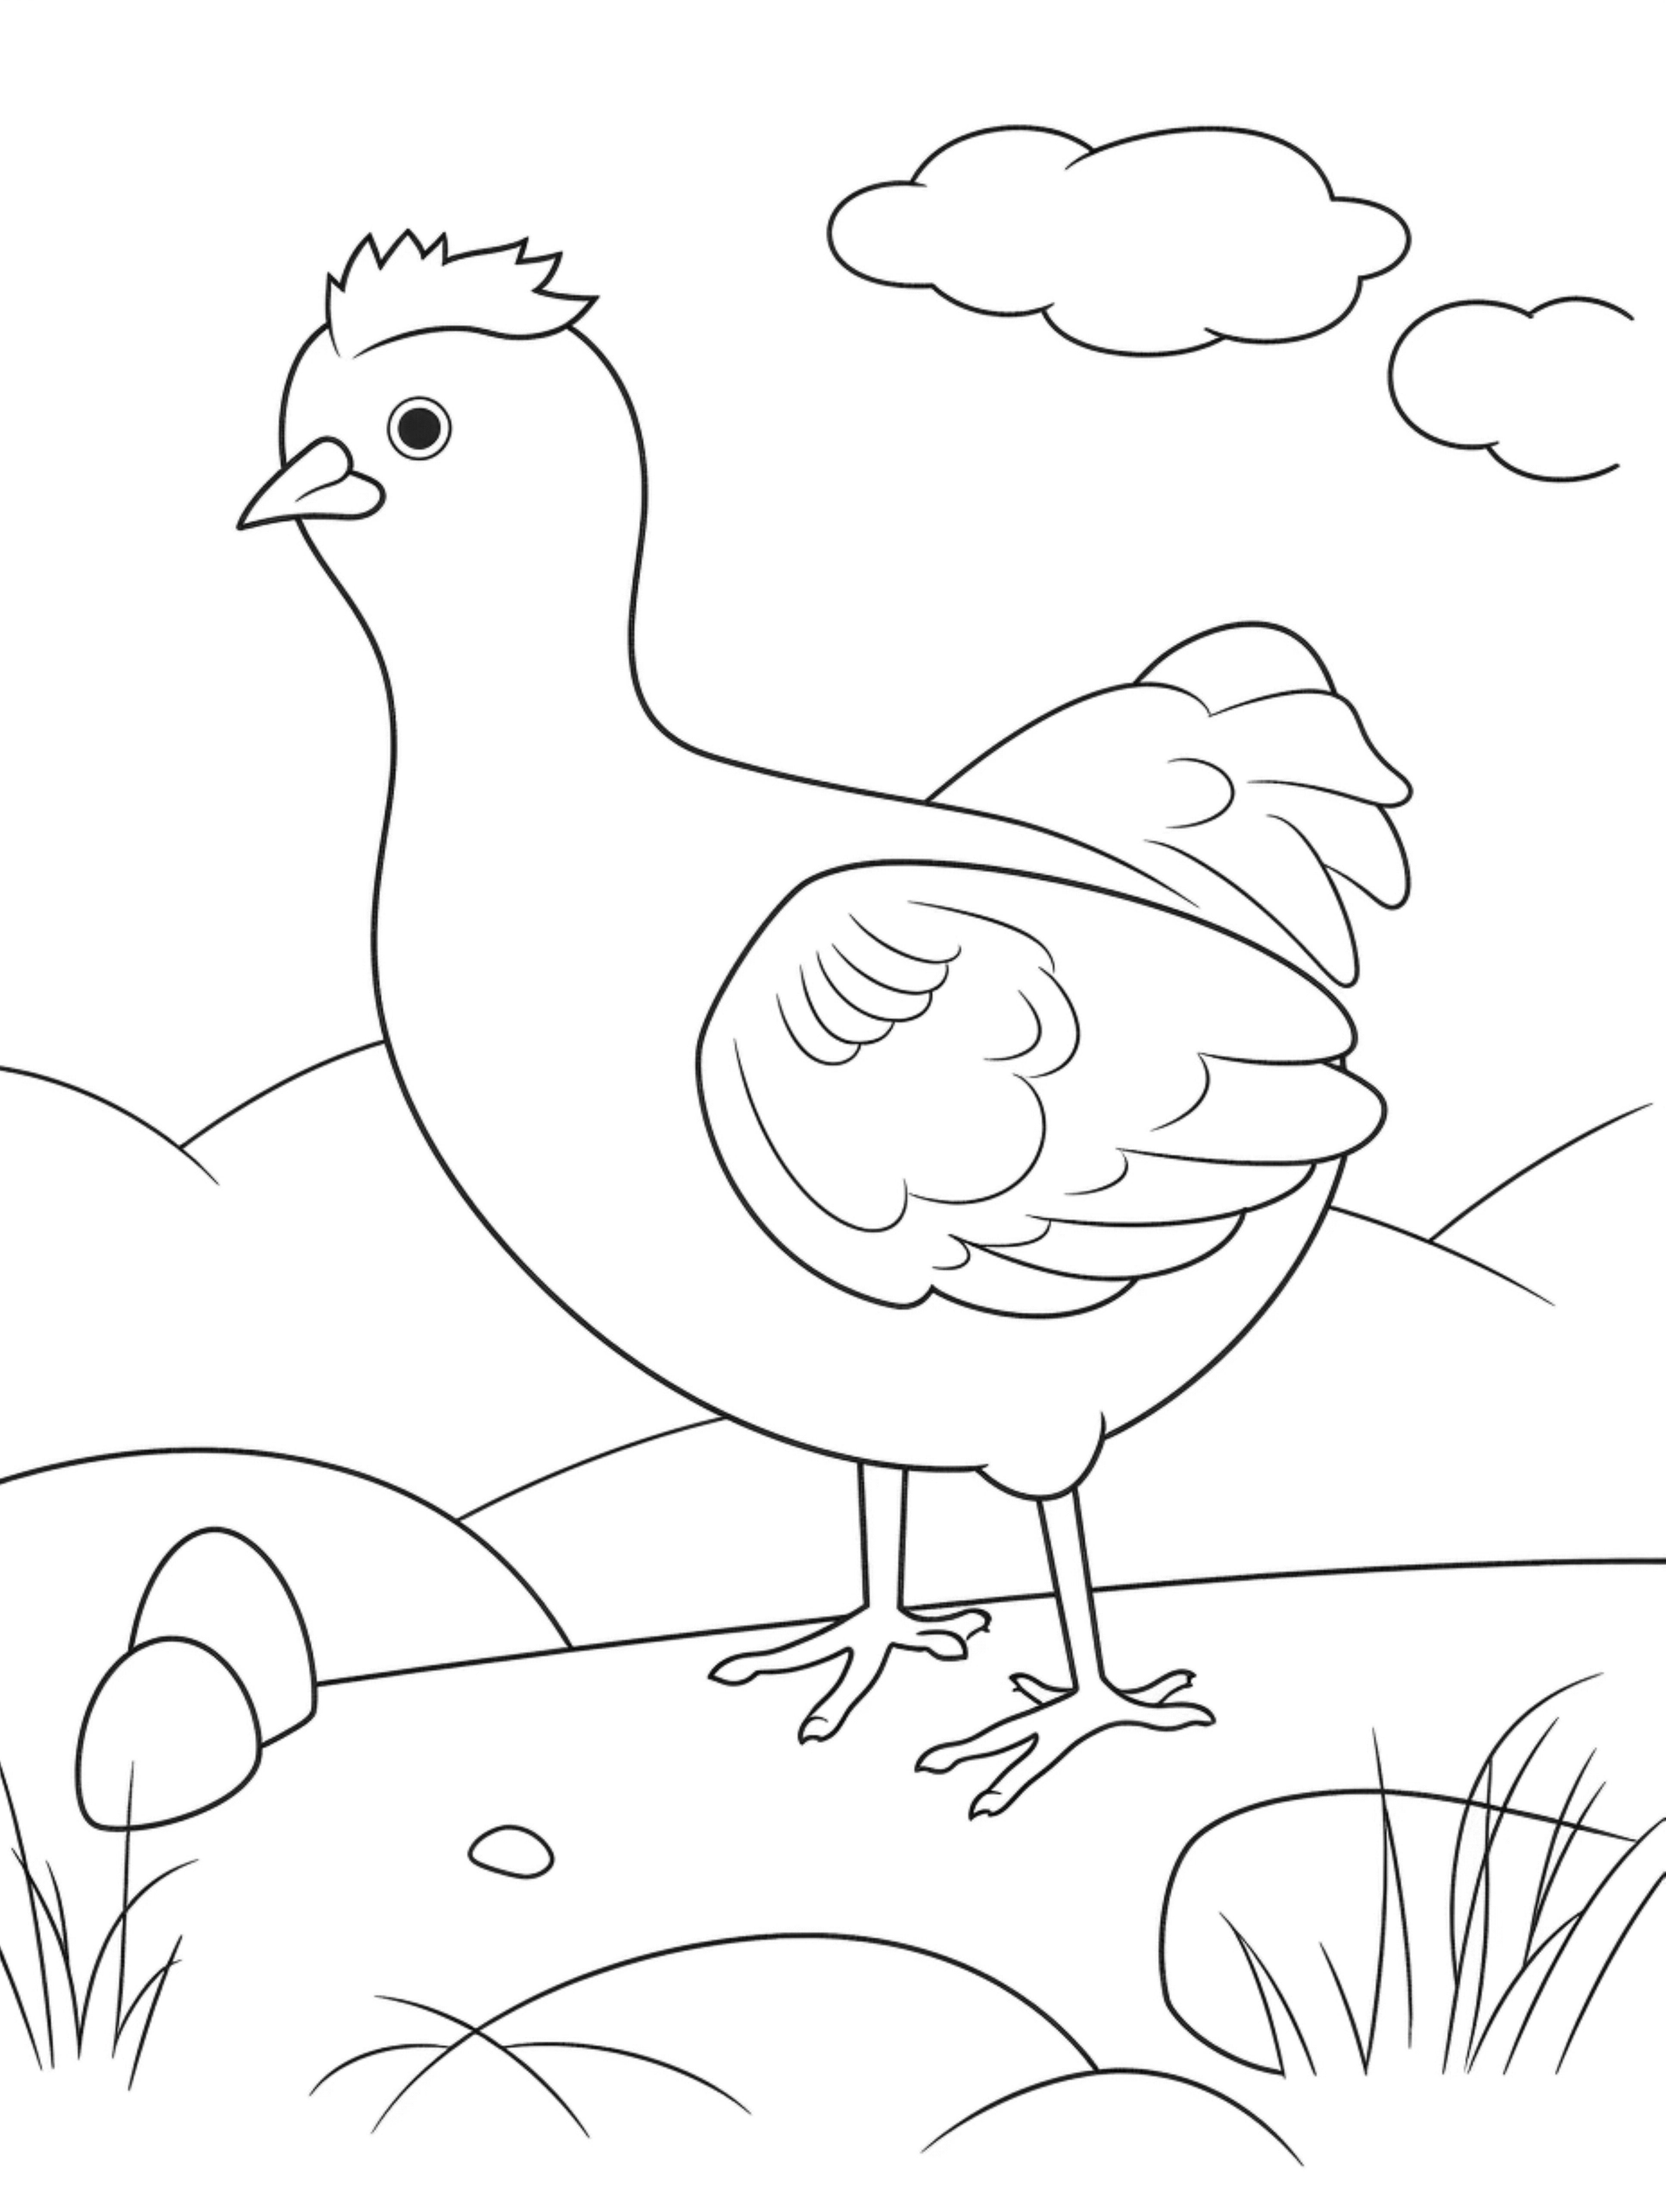 01 cute chicken in its habitat coloring page for kid